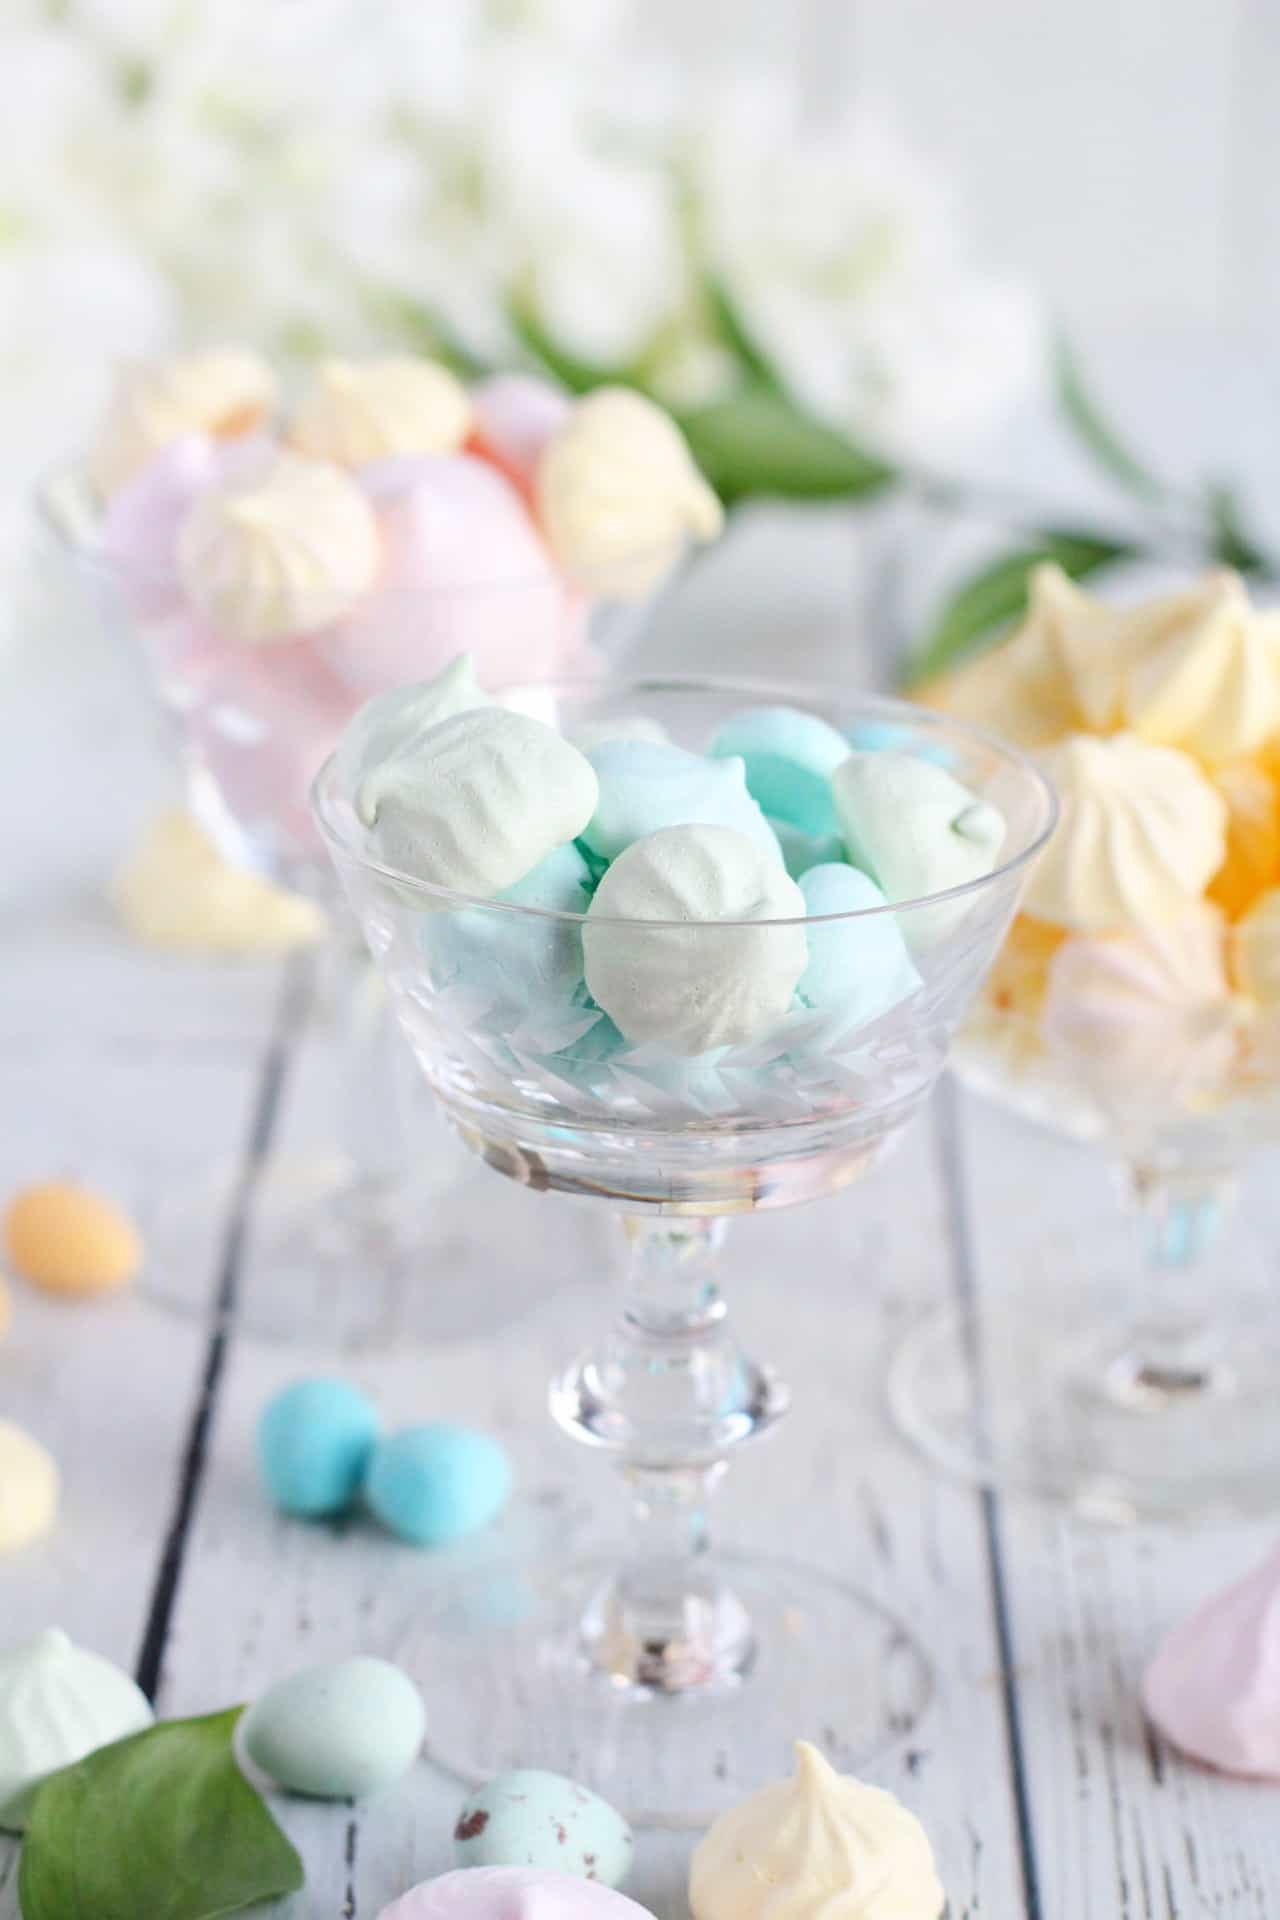 blue meringues in  vintage champagnglass with other small meringues of pastel colors behind